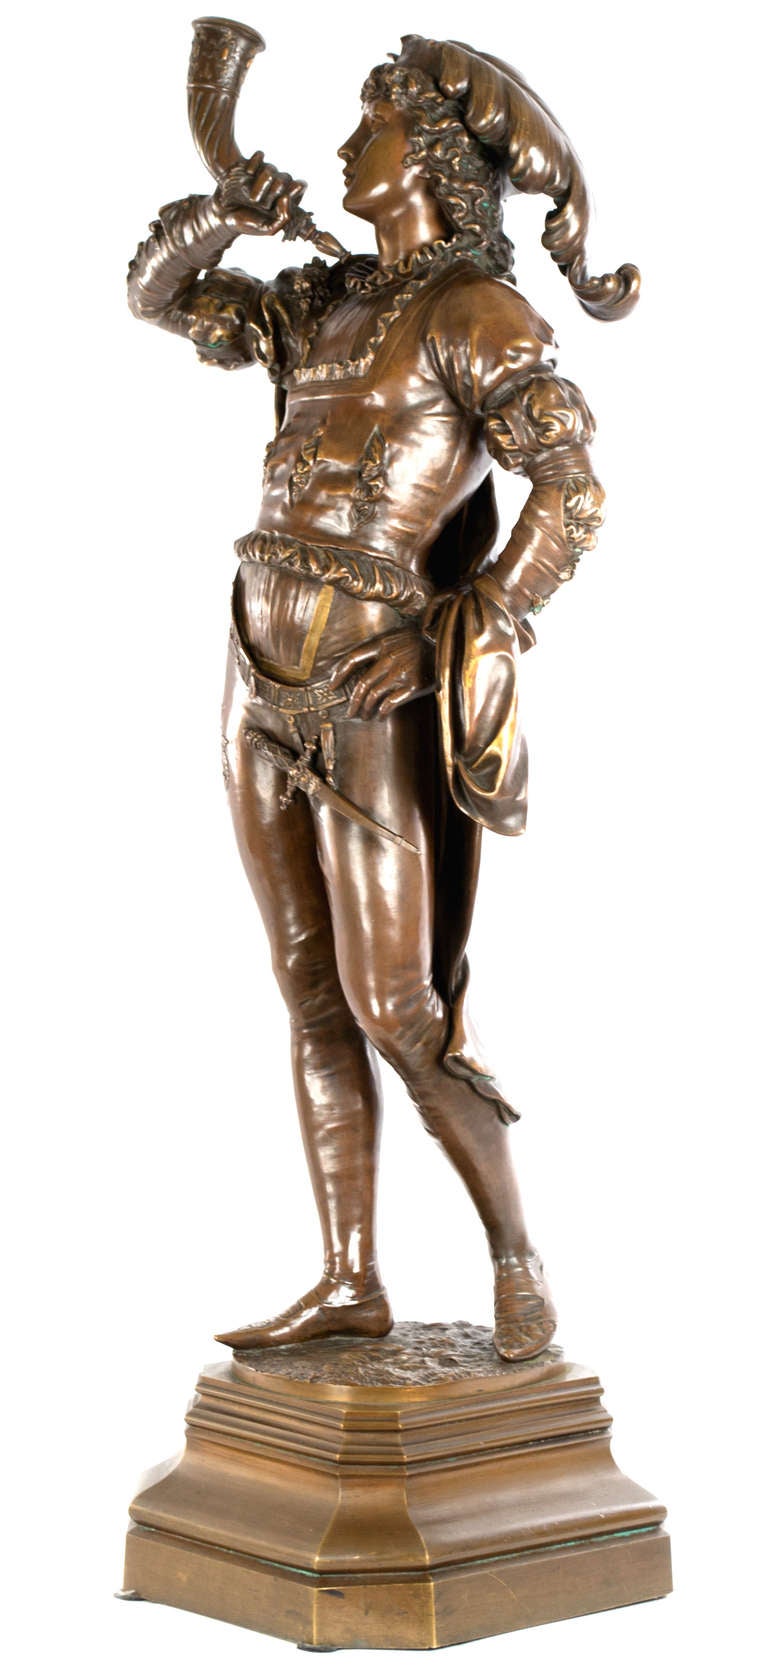 The Royal Herald - Sculpture by Charles Georges Ferville-Suan